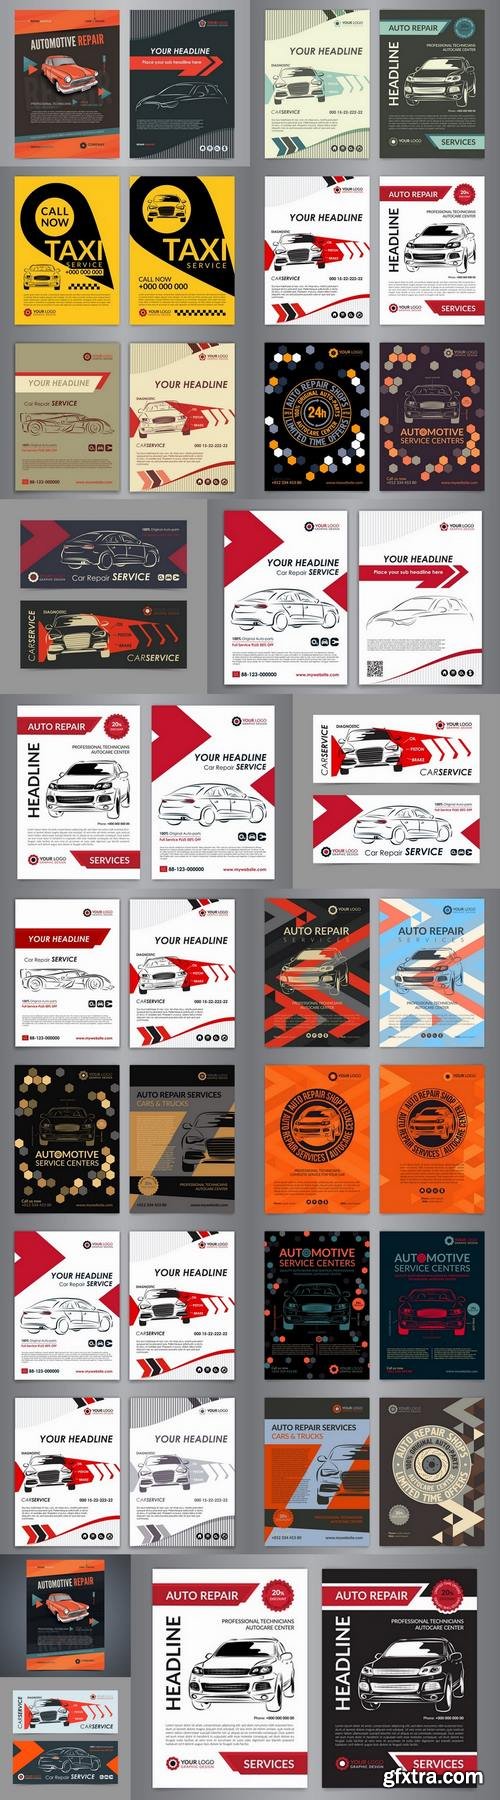 Flyer car taxi banner advertising poster signboard invitation card business card 21 EPS